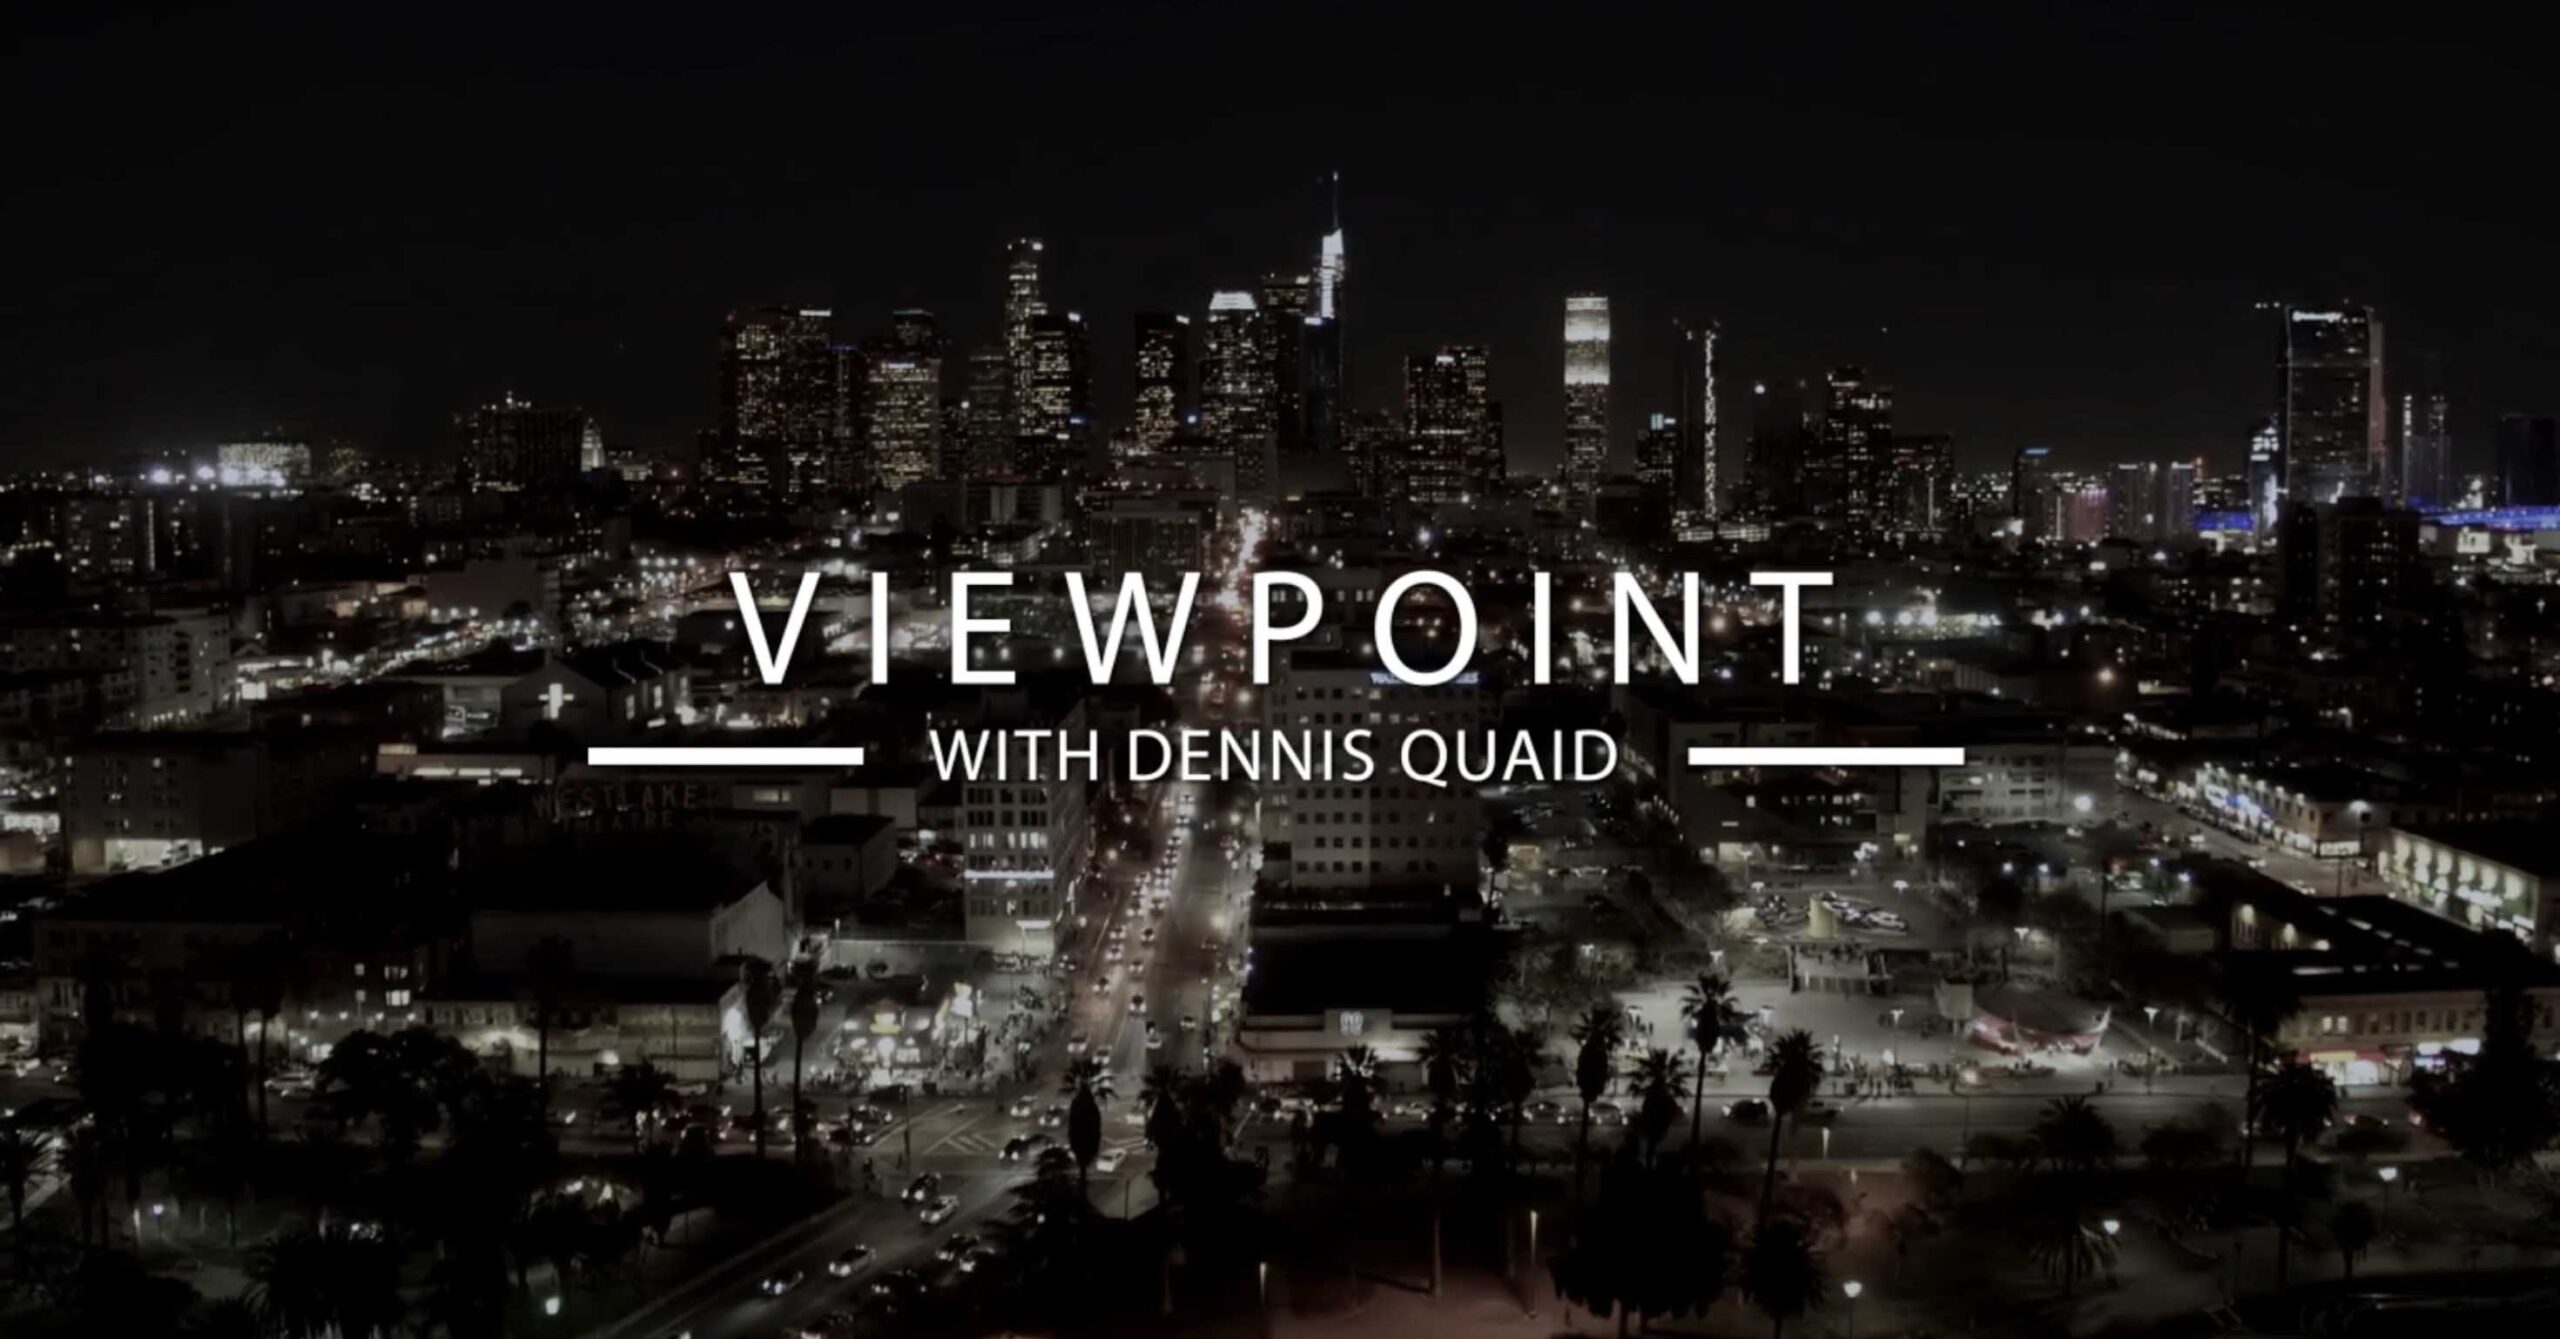 Trinity Christian College was recently featured on Viewpoint with Dennis Quaid, which aired on PBS stations nationwide. The episode promoted awareness about how Trinity is providing pathways to debt-free education through its new, transformative economic model.